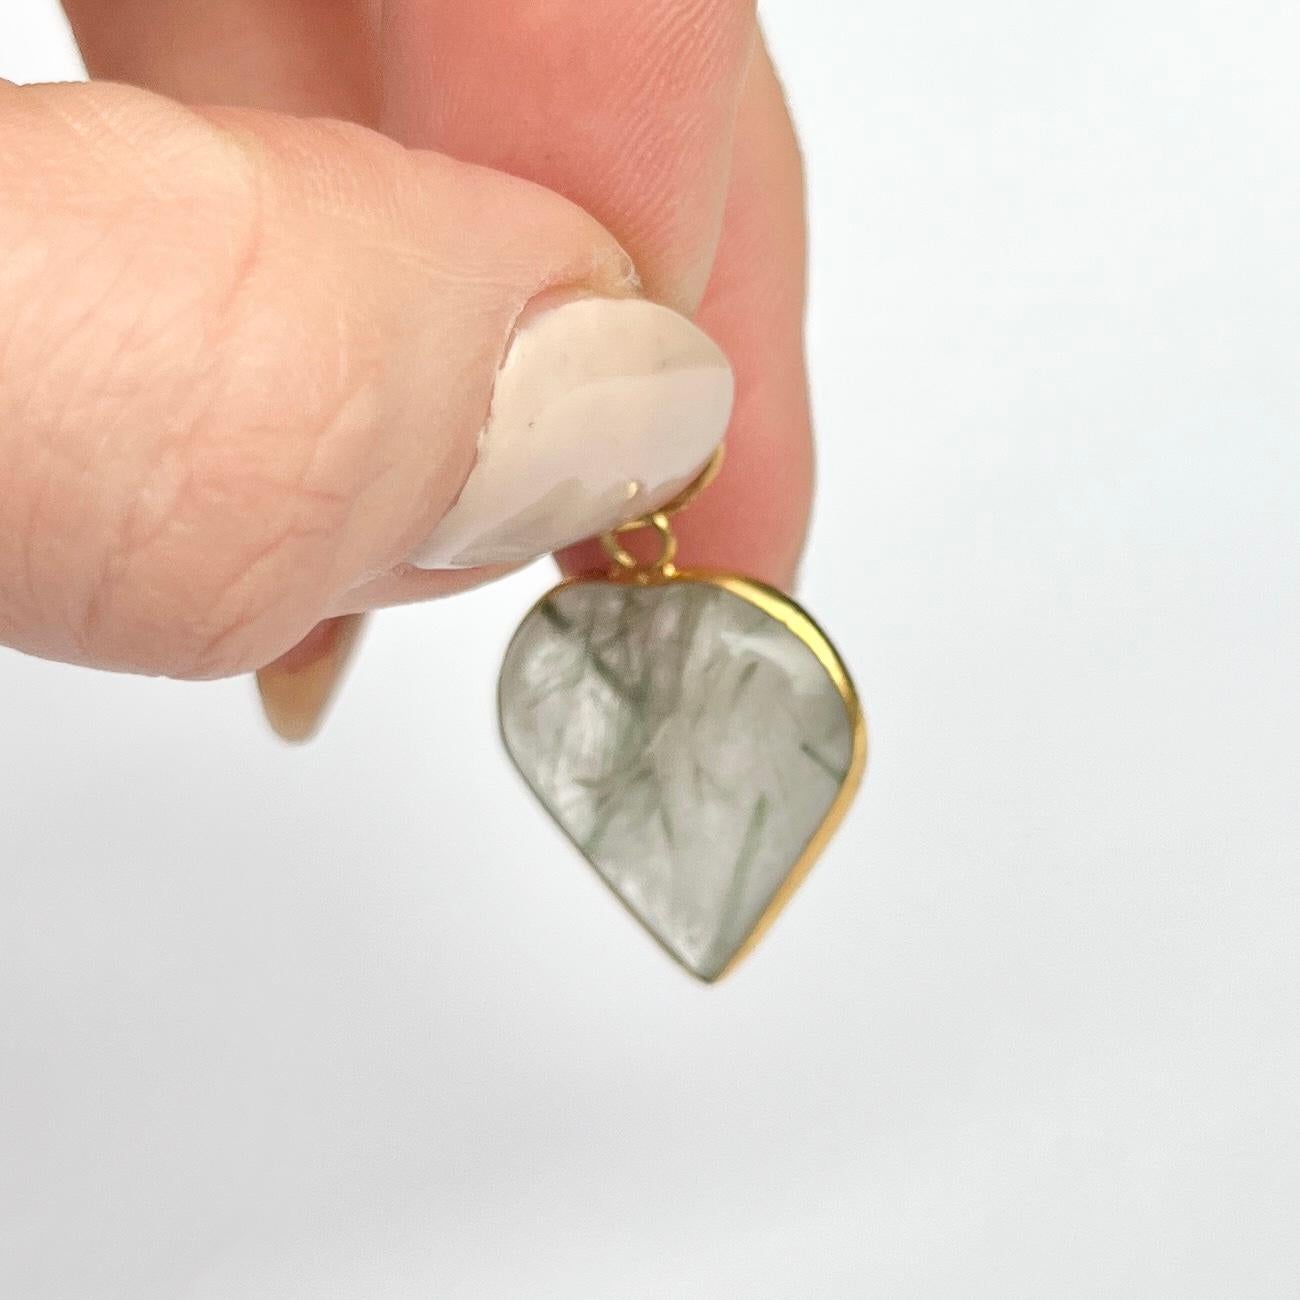 Gorgeous and simple agate pendant. The stone is a soft heart shape and is surrounded by a delicate strip of 9ct gold. 

Height inc loop: 26mm

Weight: 3.1g
